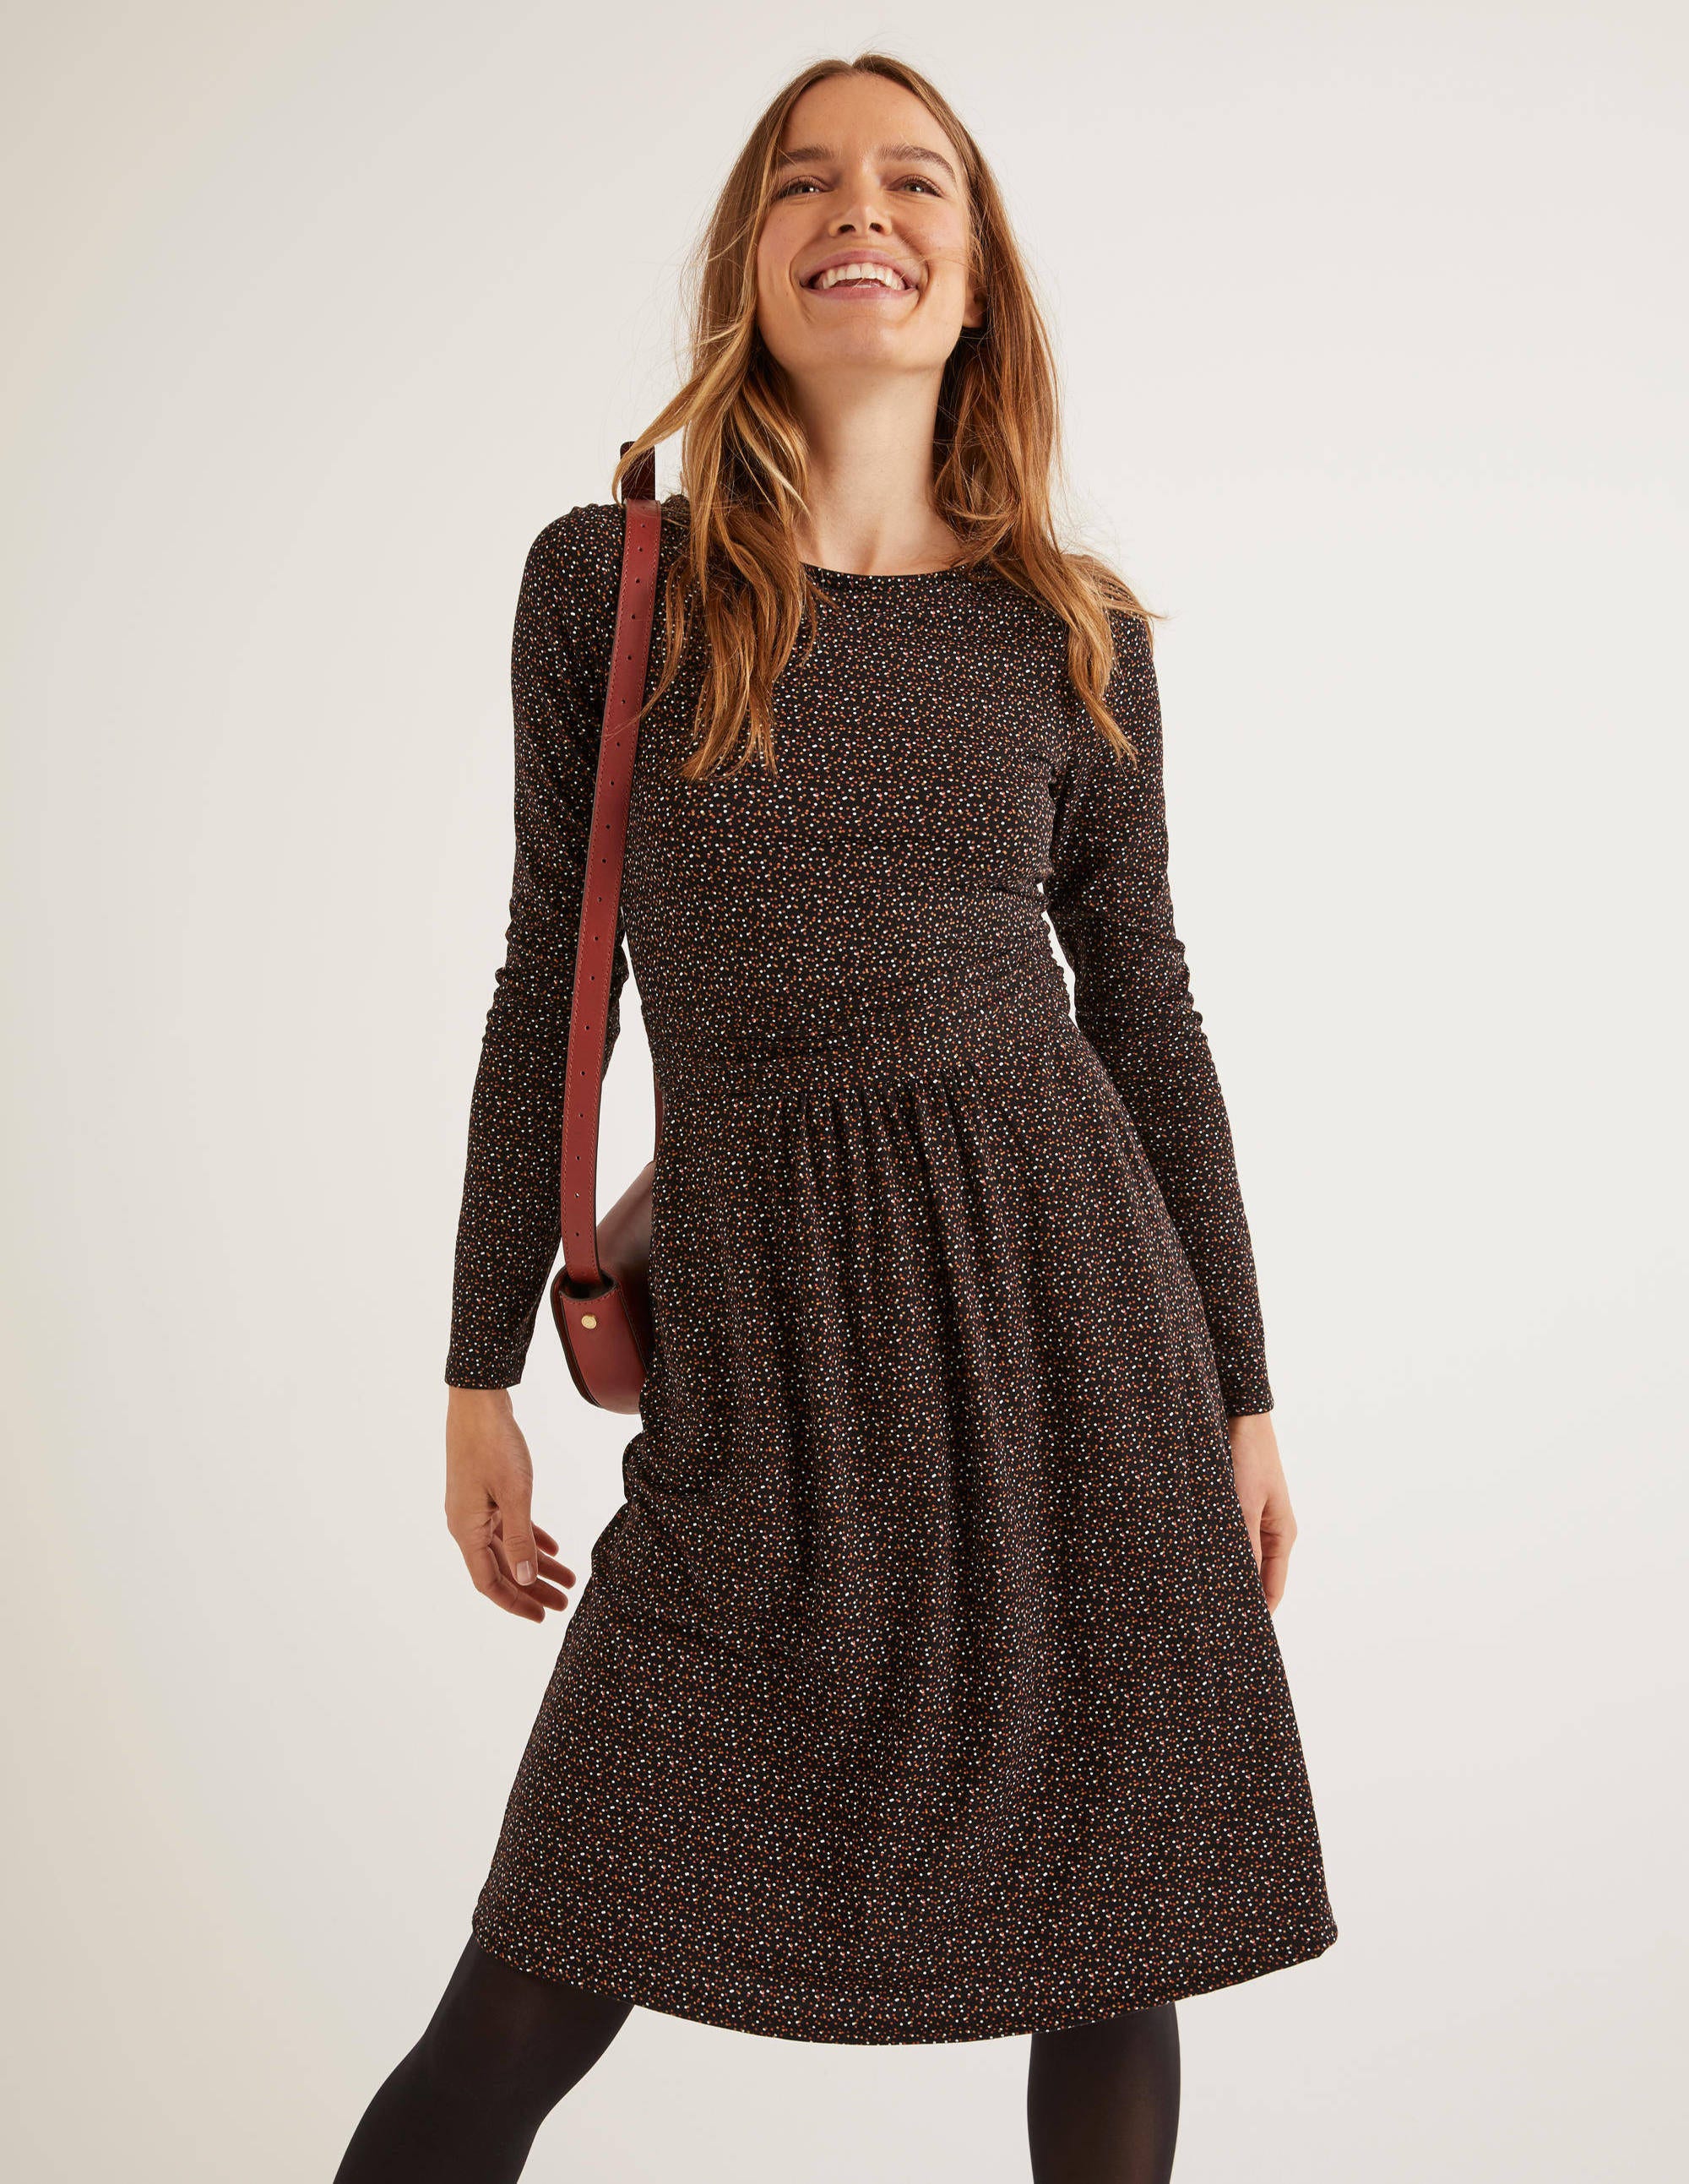 boden style dresses